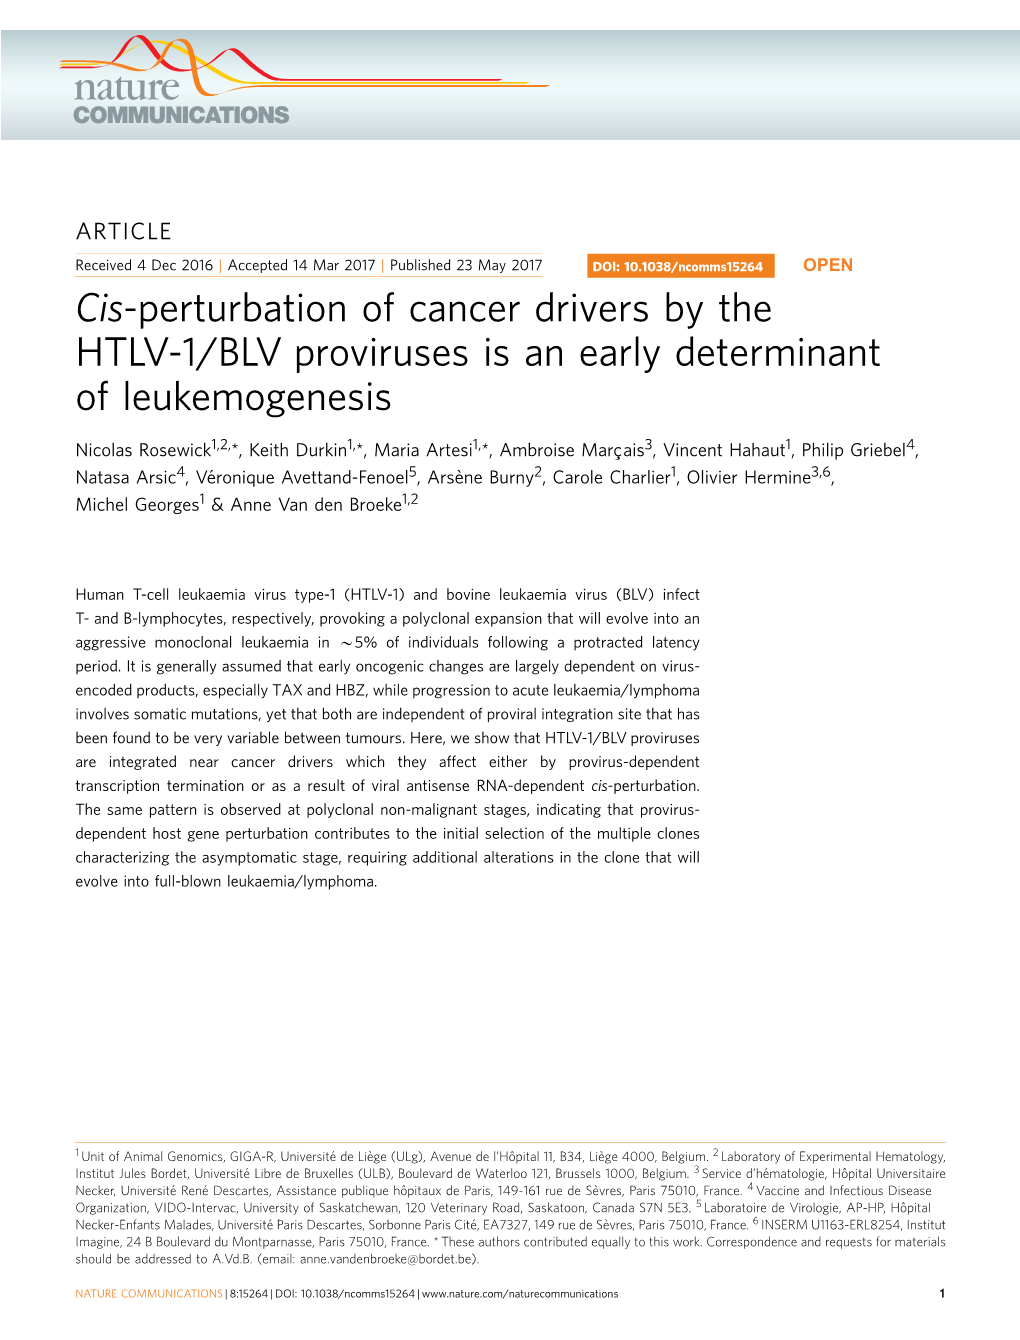 Cis-Perturbation of Cancer Drivers by the HTLV-1/BLV Proviruses Is an Early Determinant of Leukemogenesis